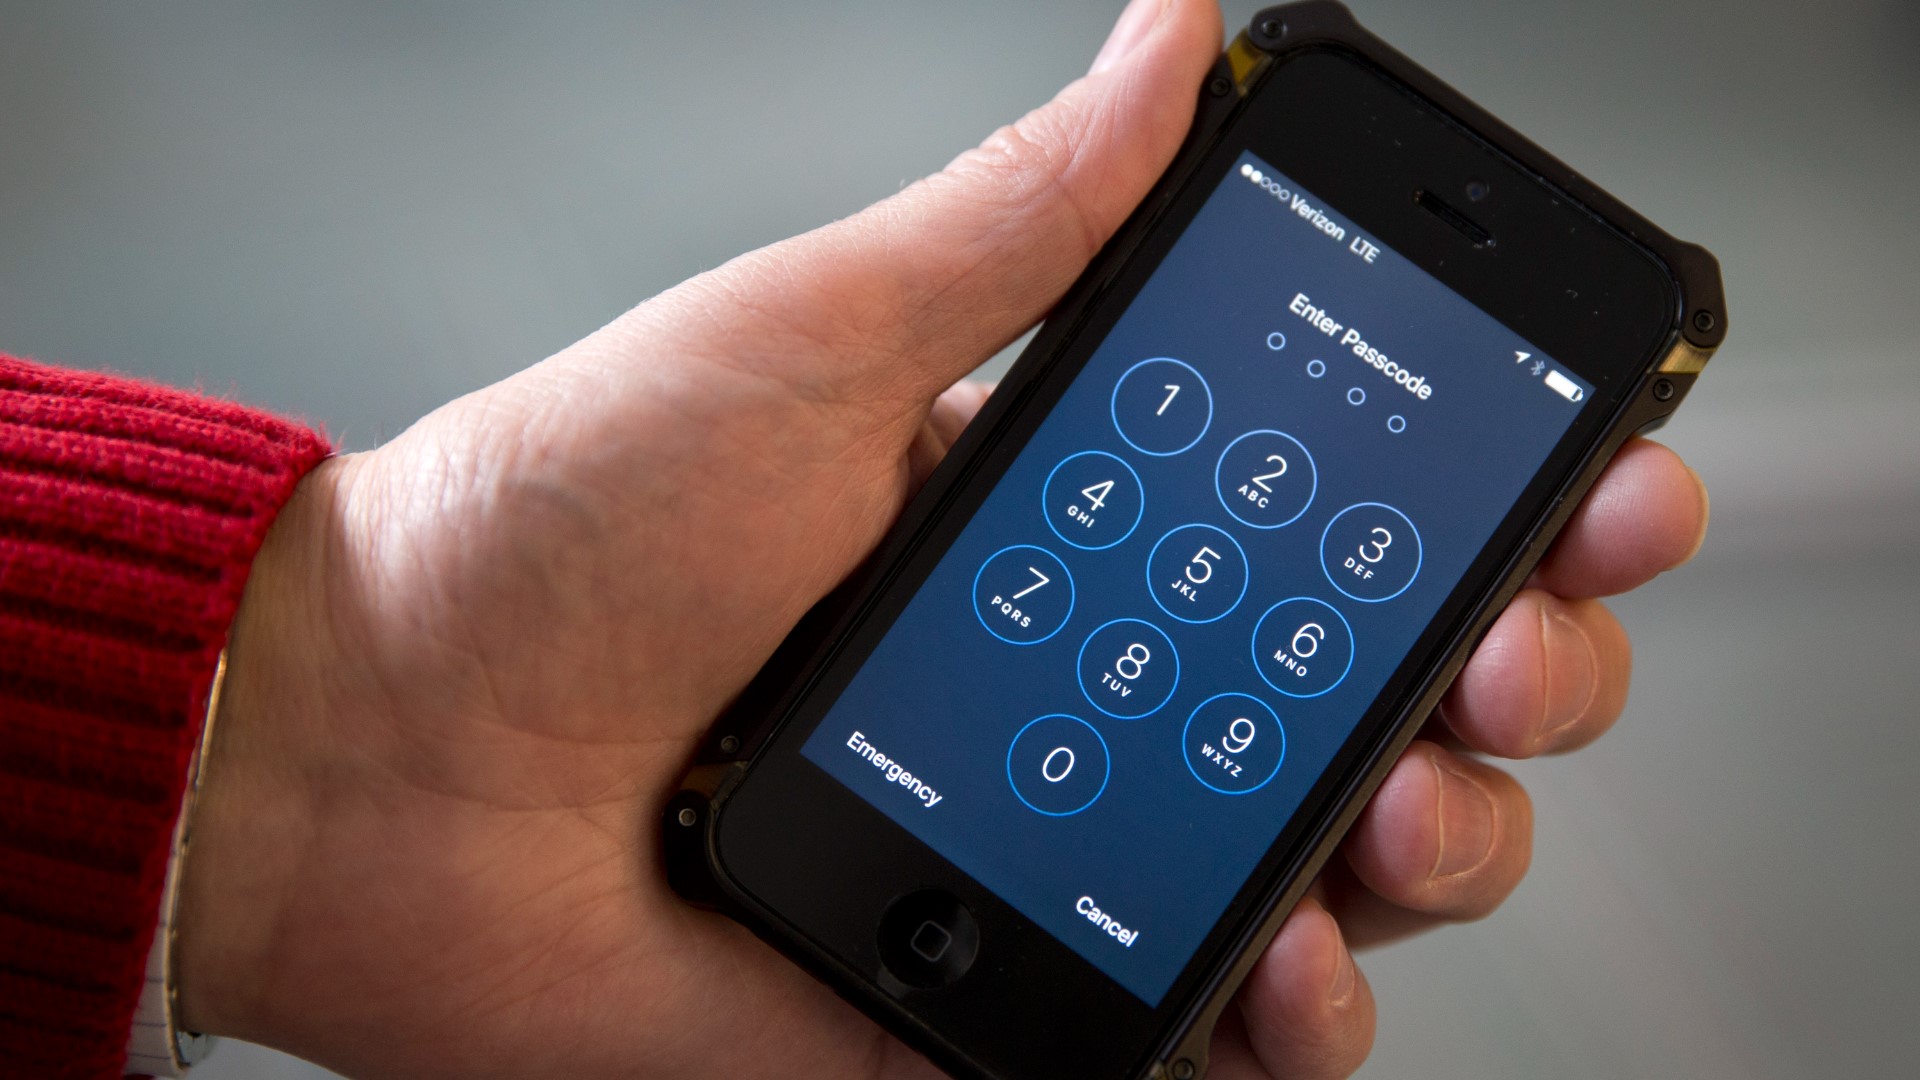 The National Security Agency recommends rebooting a phone every week as a way to stop hacking.